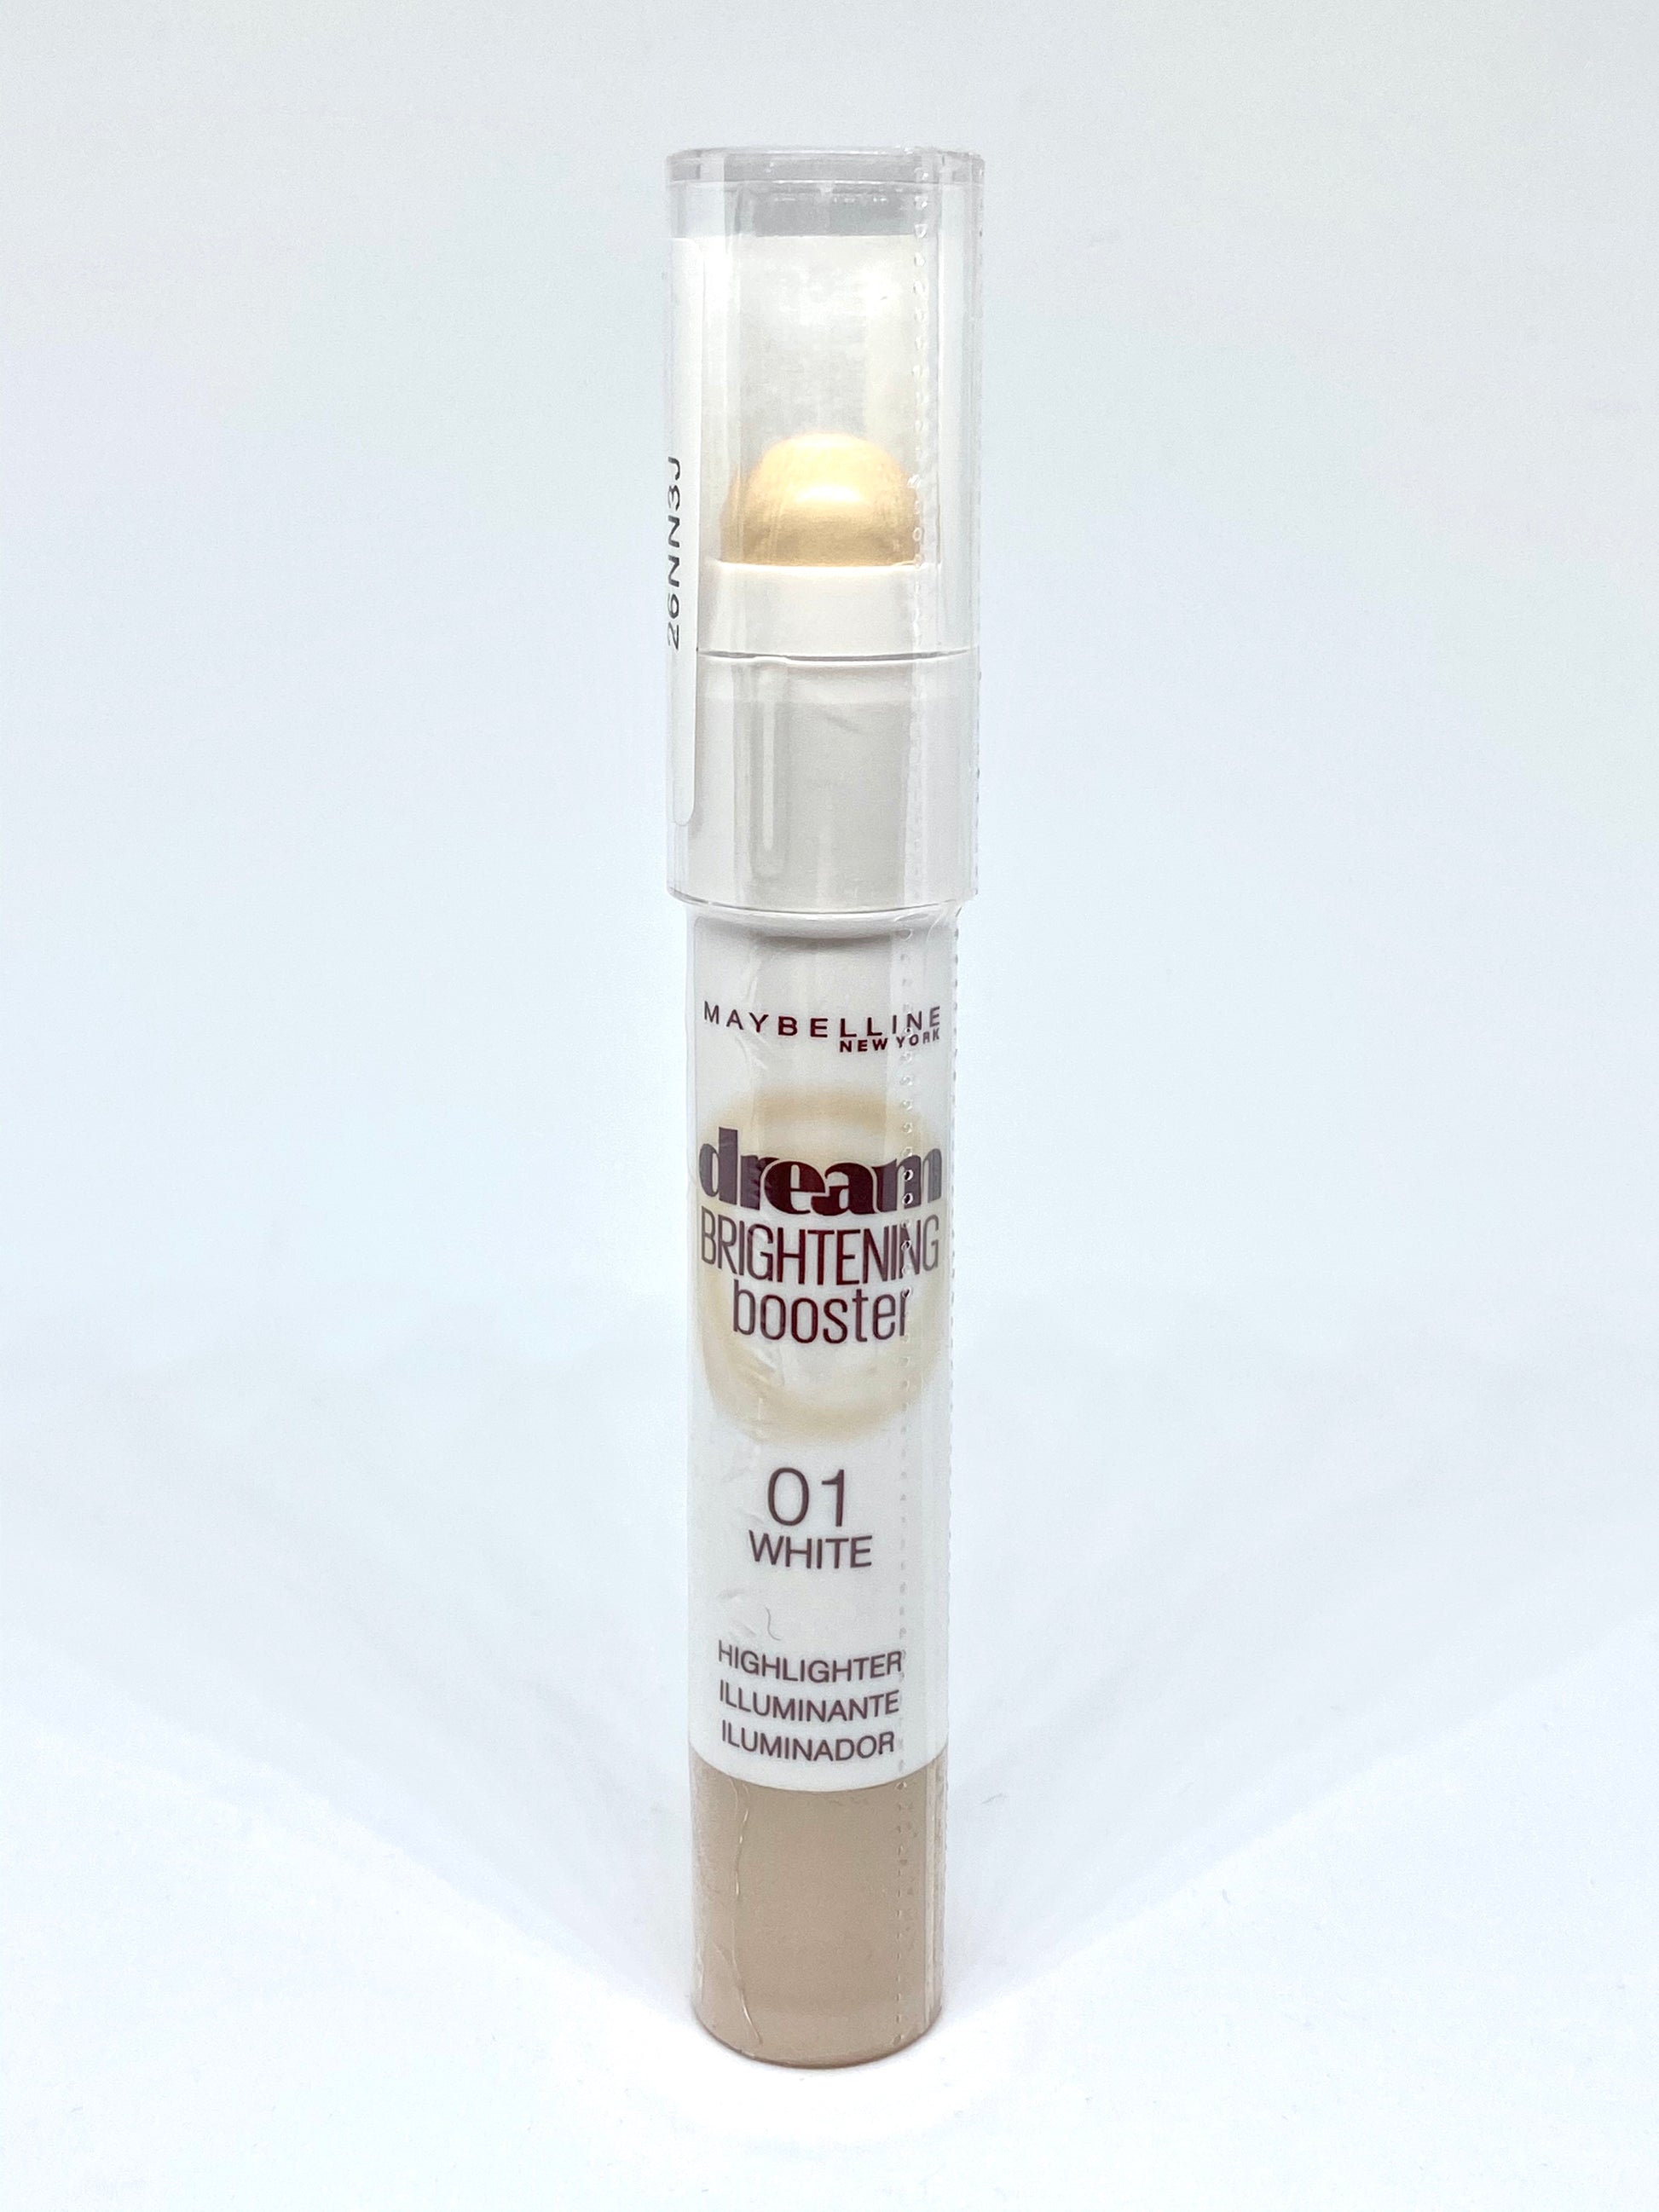 Maybelline Dream Brightening Concealer 01 White Highlighter-BeautyNmakeup.co.uk